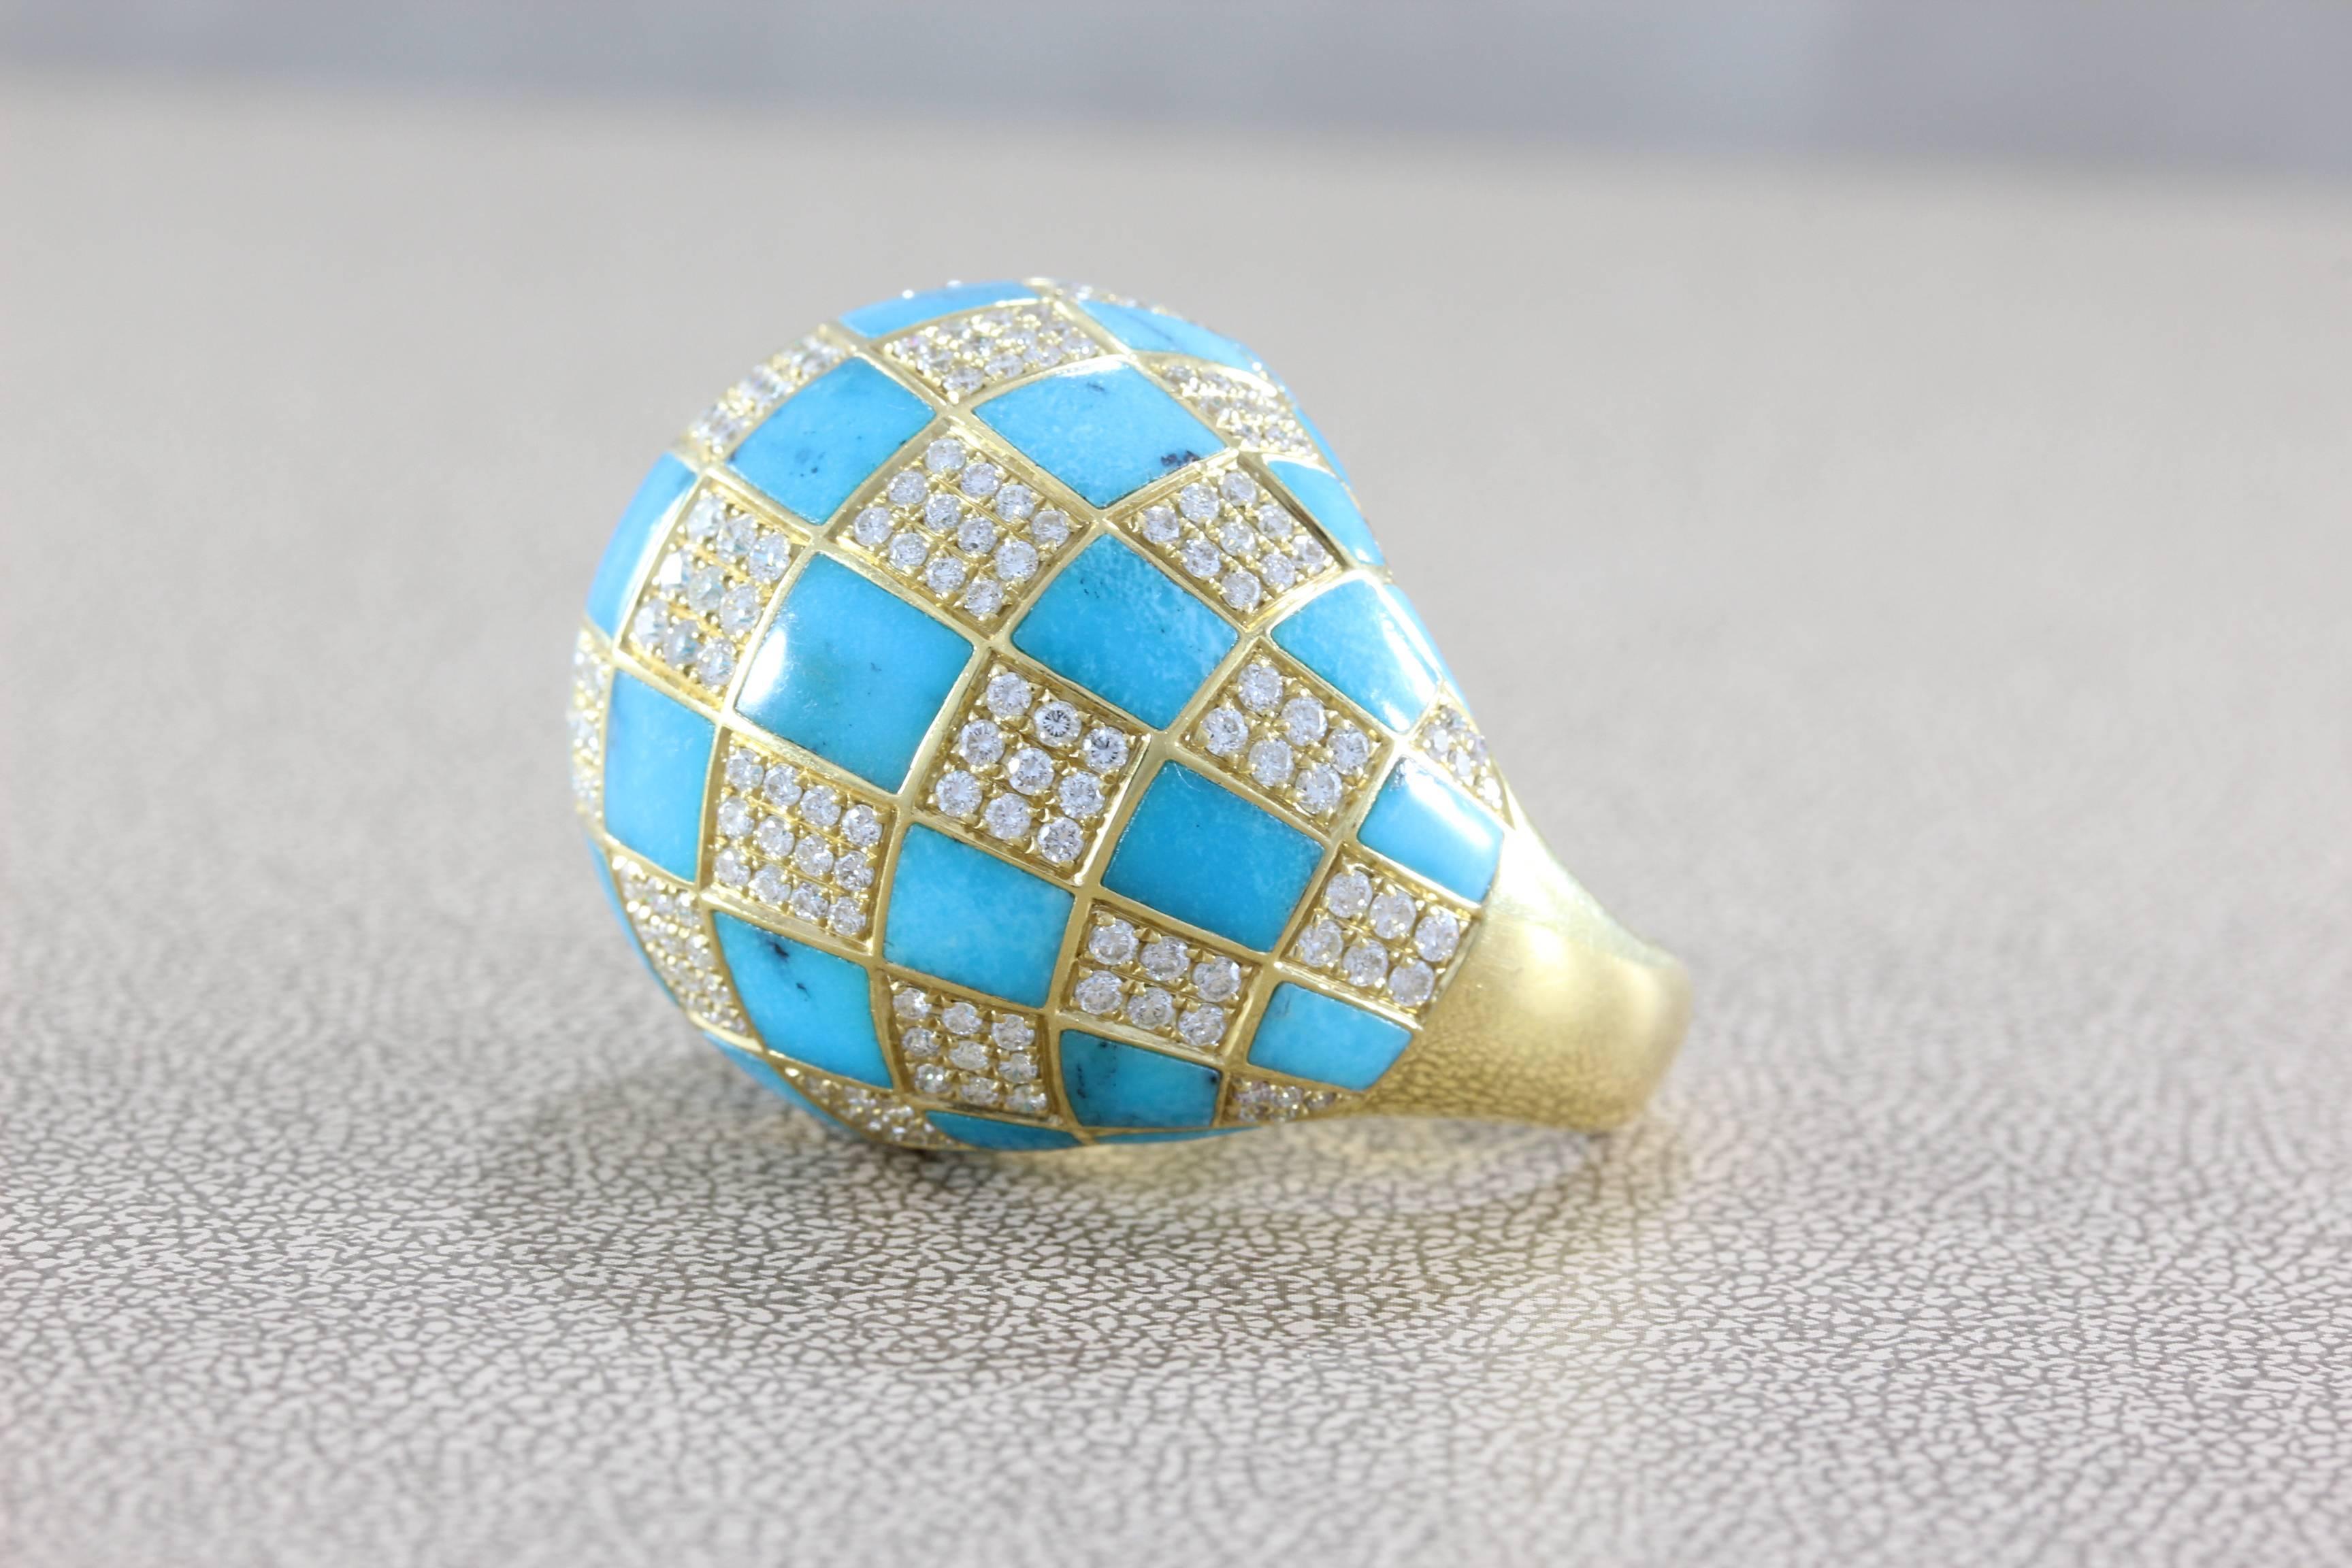 A beautifully unique domed ring with interchanging checkered diamond and turquoise panels all set in 18K yellow gold. Diamond weight approximately 4 carats, VS clarity G-H color. 
A pleasure to wear, say hello to your new best friend!

Dimensions: